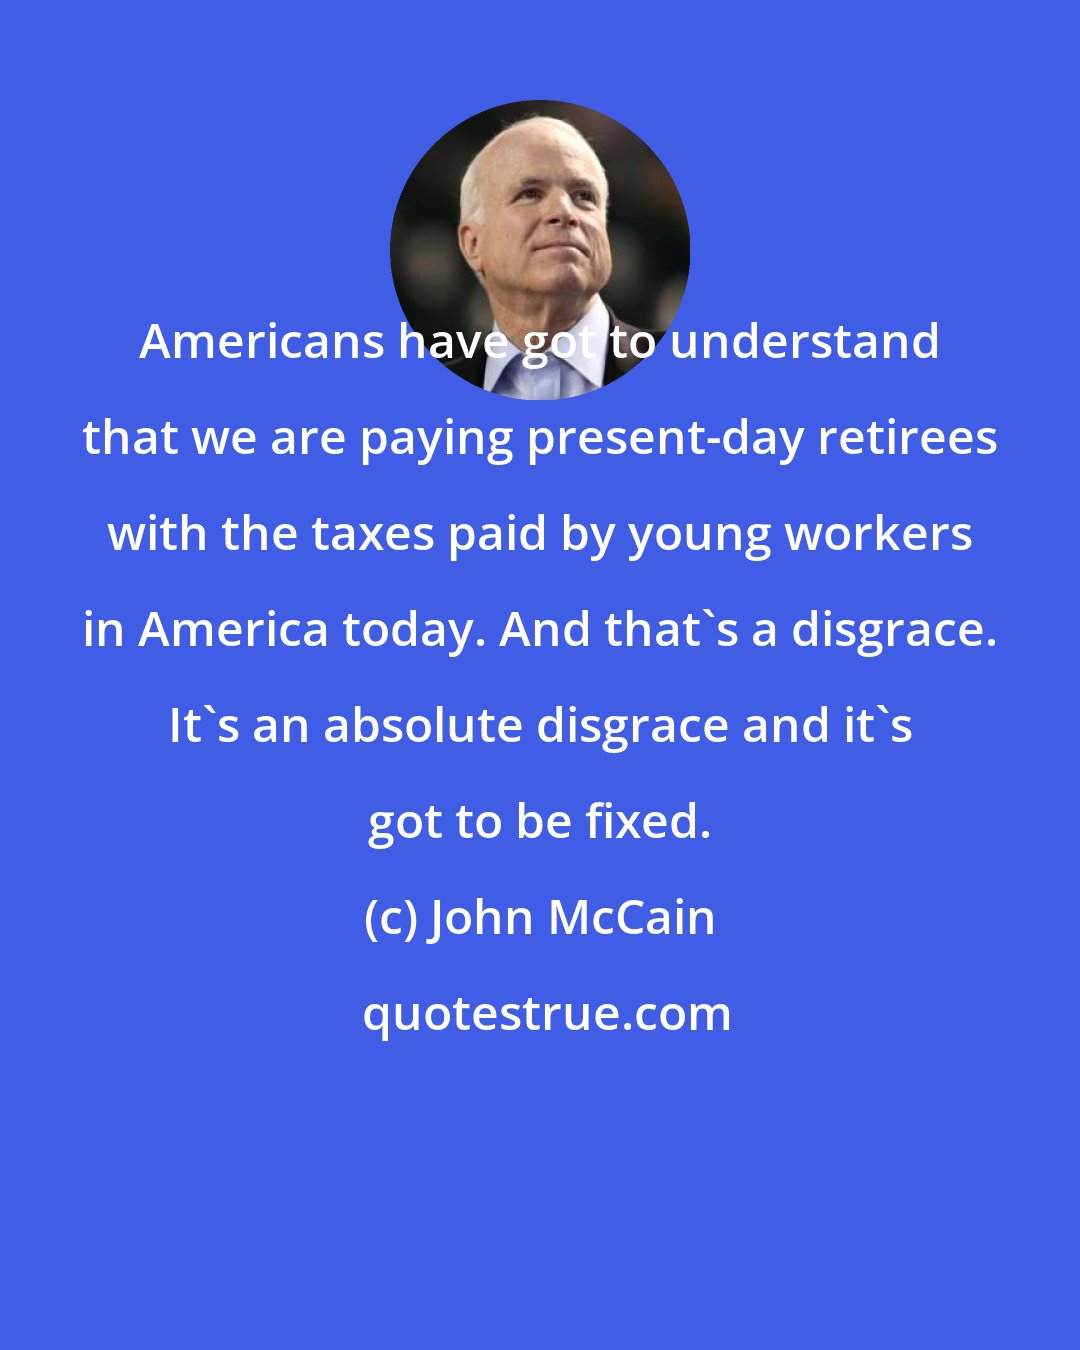 John McCain: Americans have got to understand that we are paying present-day retirees with the taxes paid by young workers in America today. And that's a disgrace. It's an absolute disgrace and it's got to be fixed.